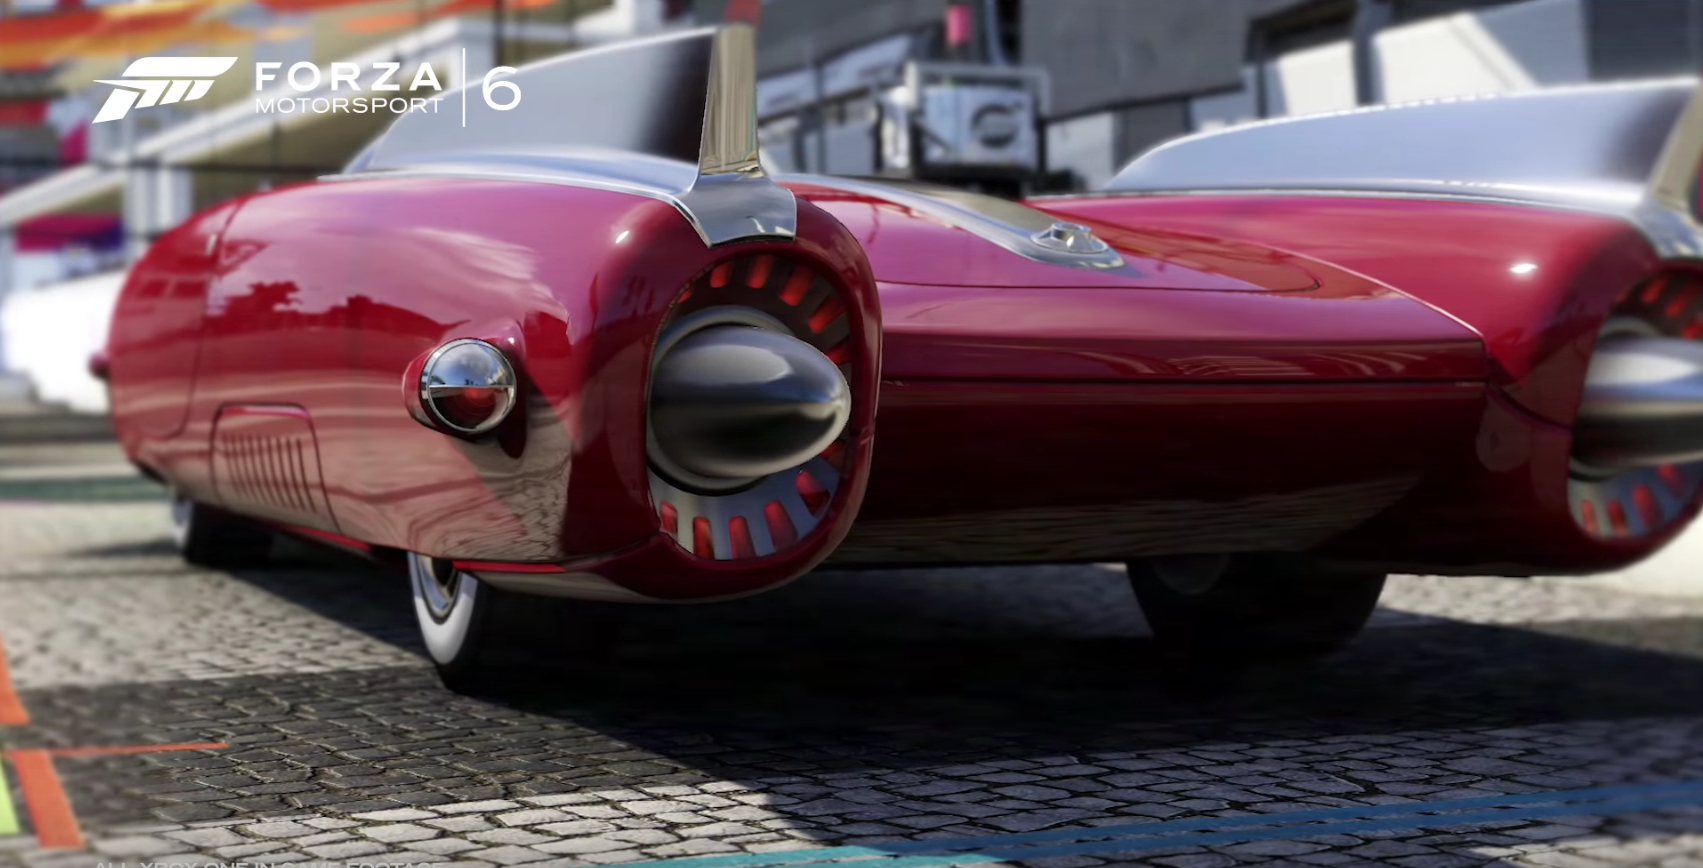 Two Fallout 4 themed vehicles coming to Forza 6